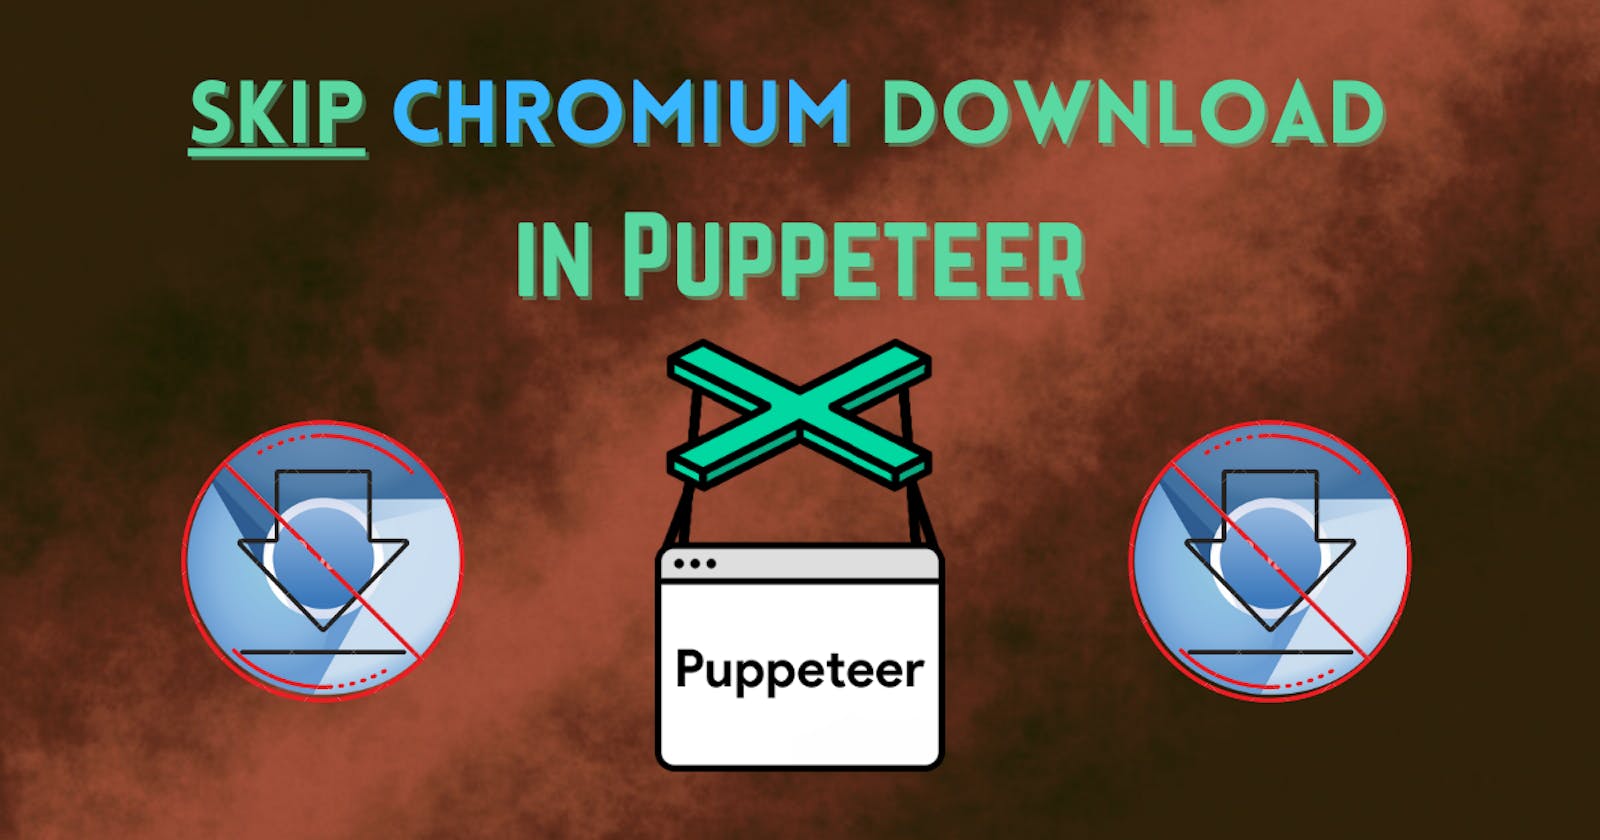 ⚡ How to skip Chromium download in Puppeteer?